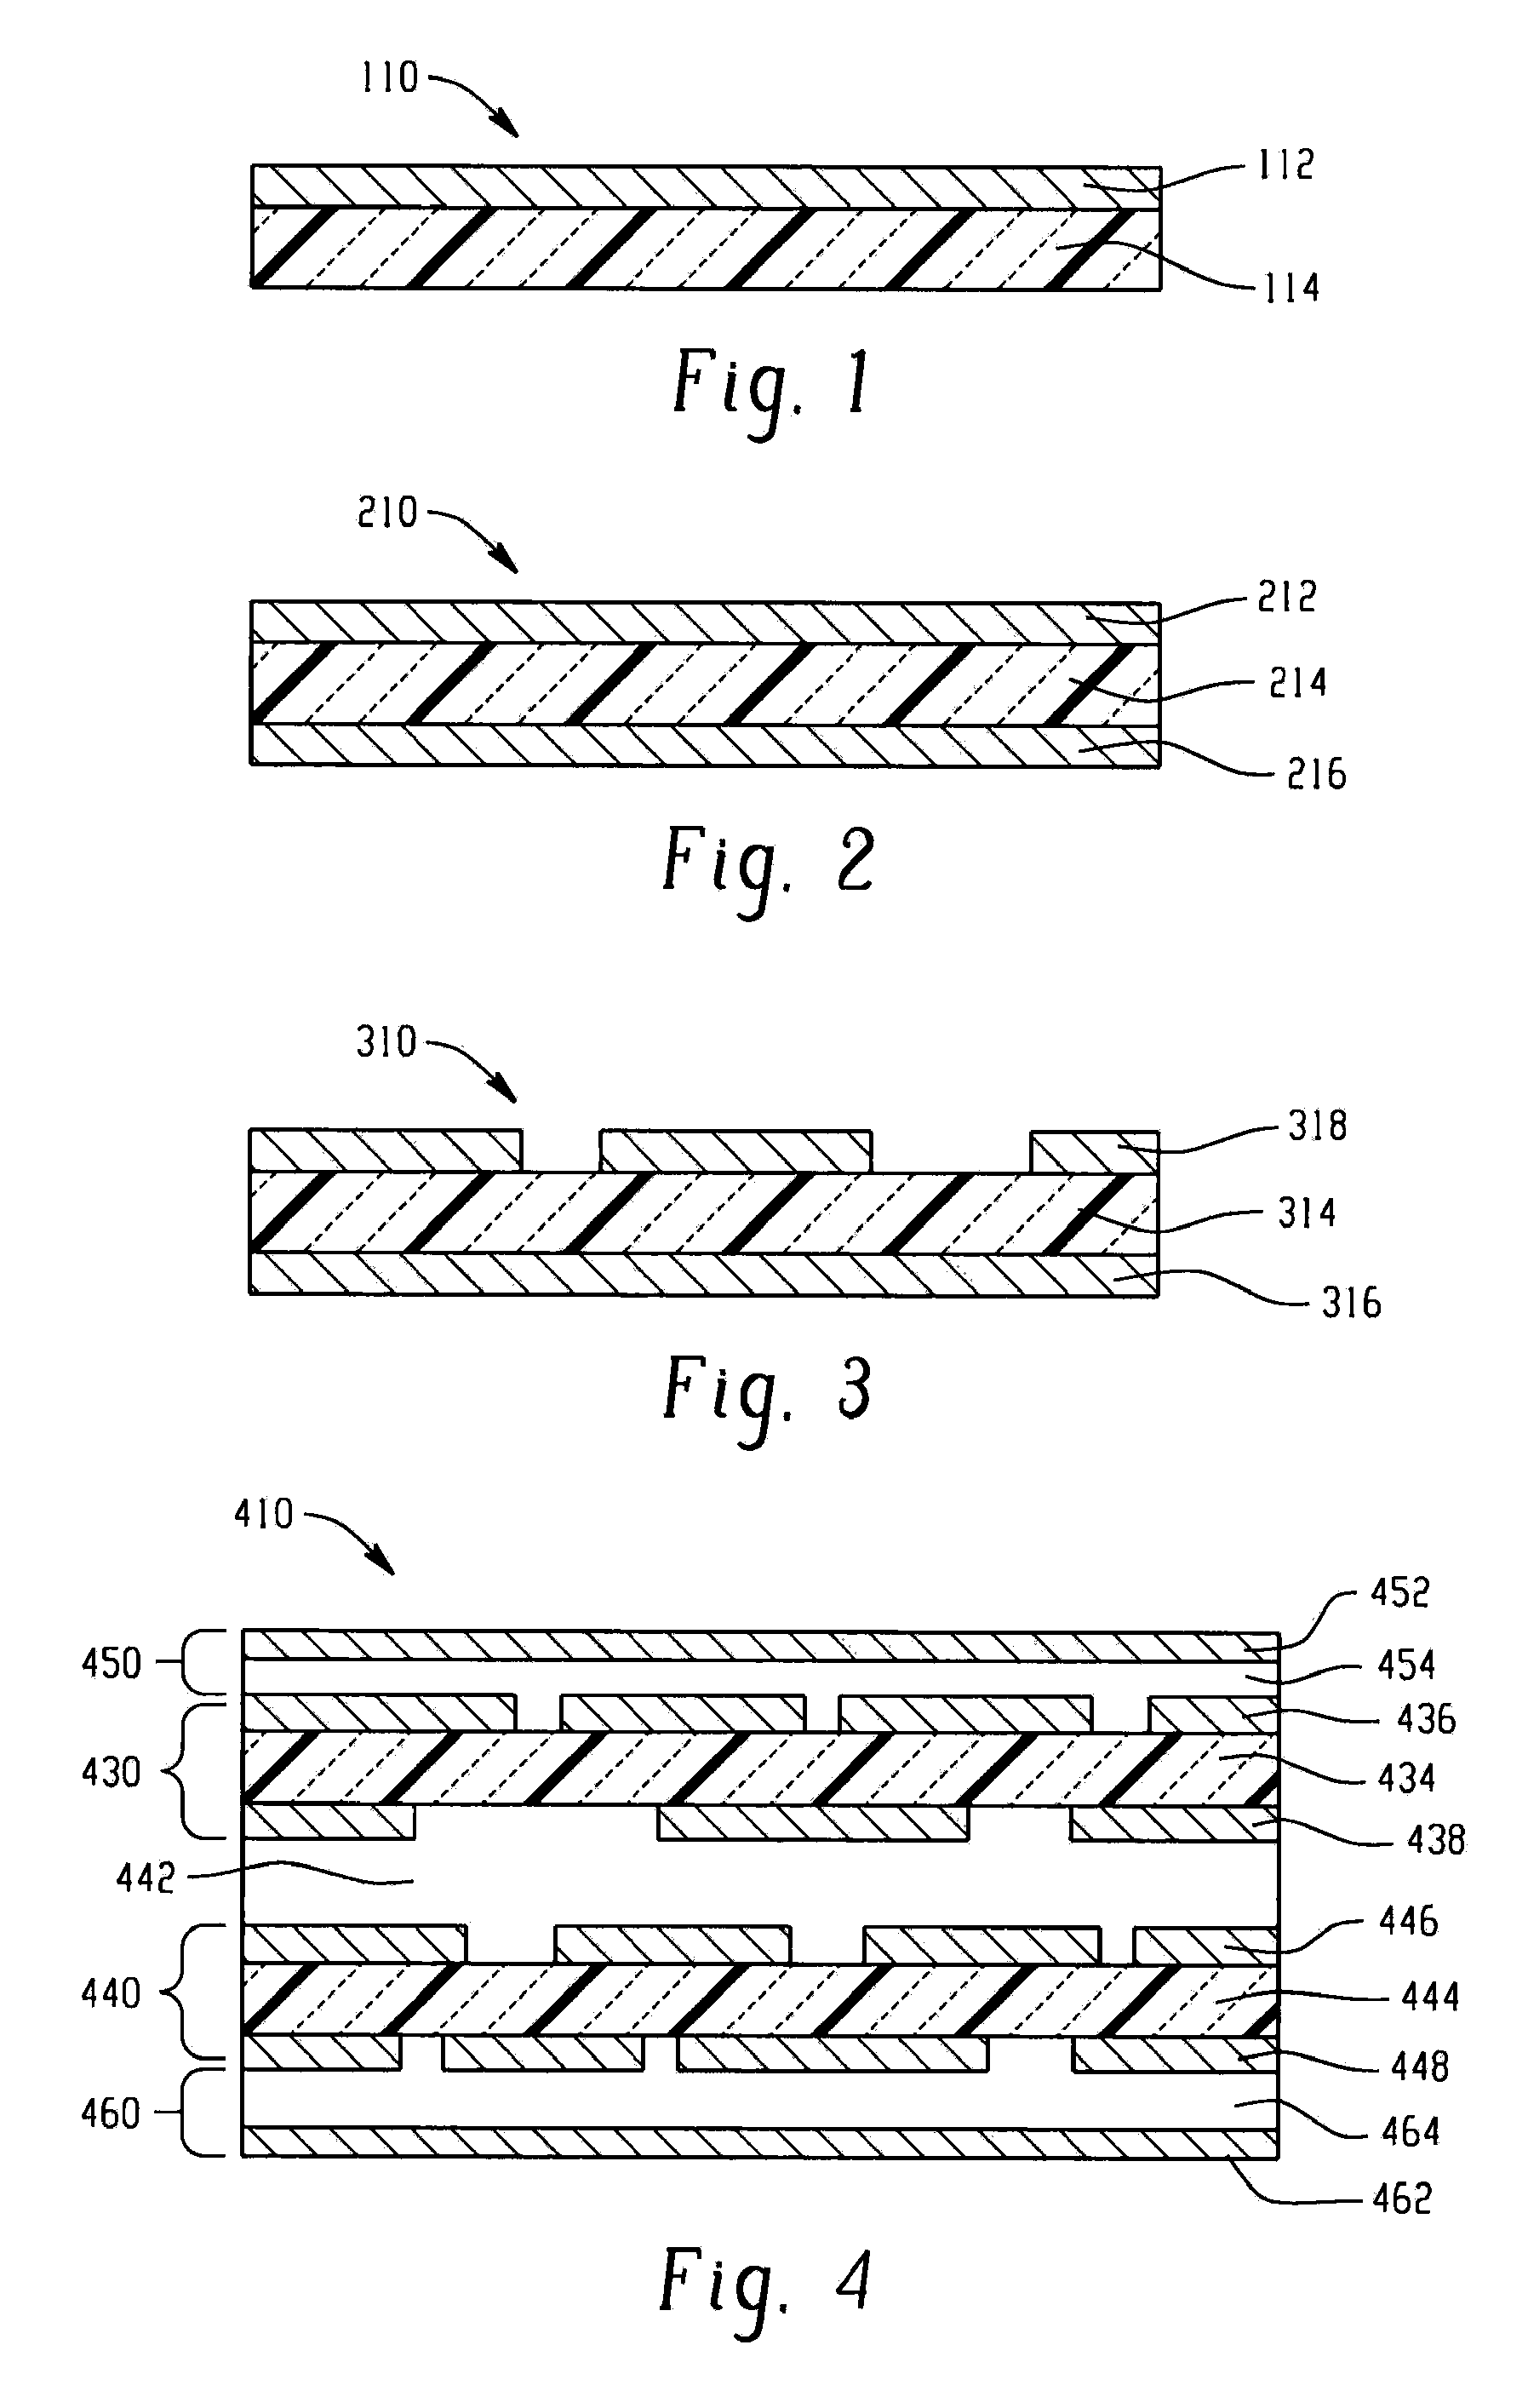 Circuit materials, circuits laminates, and method of manufacture thereof